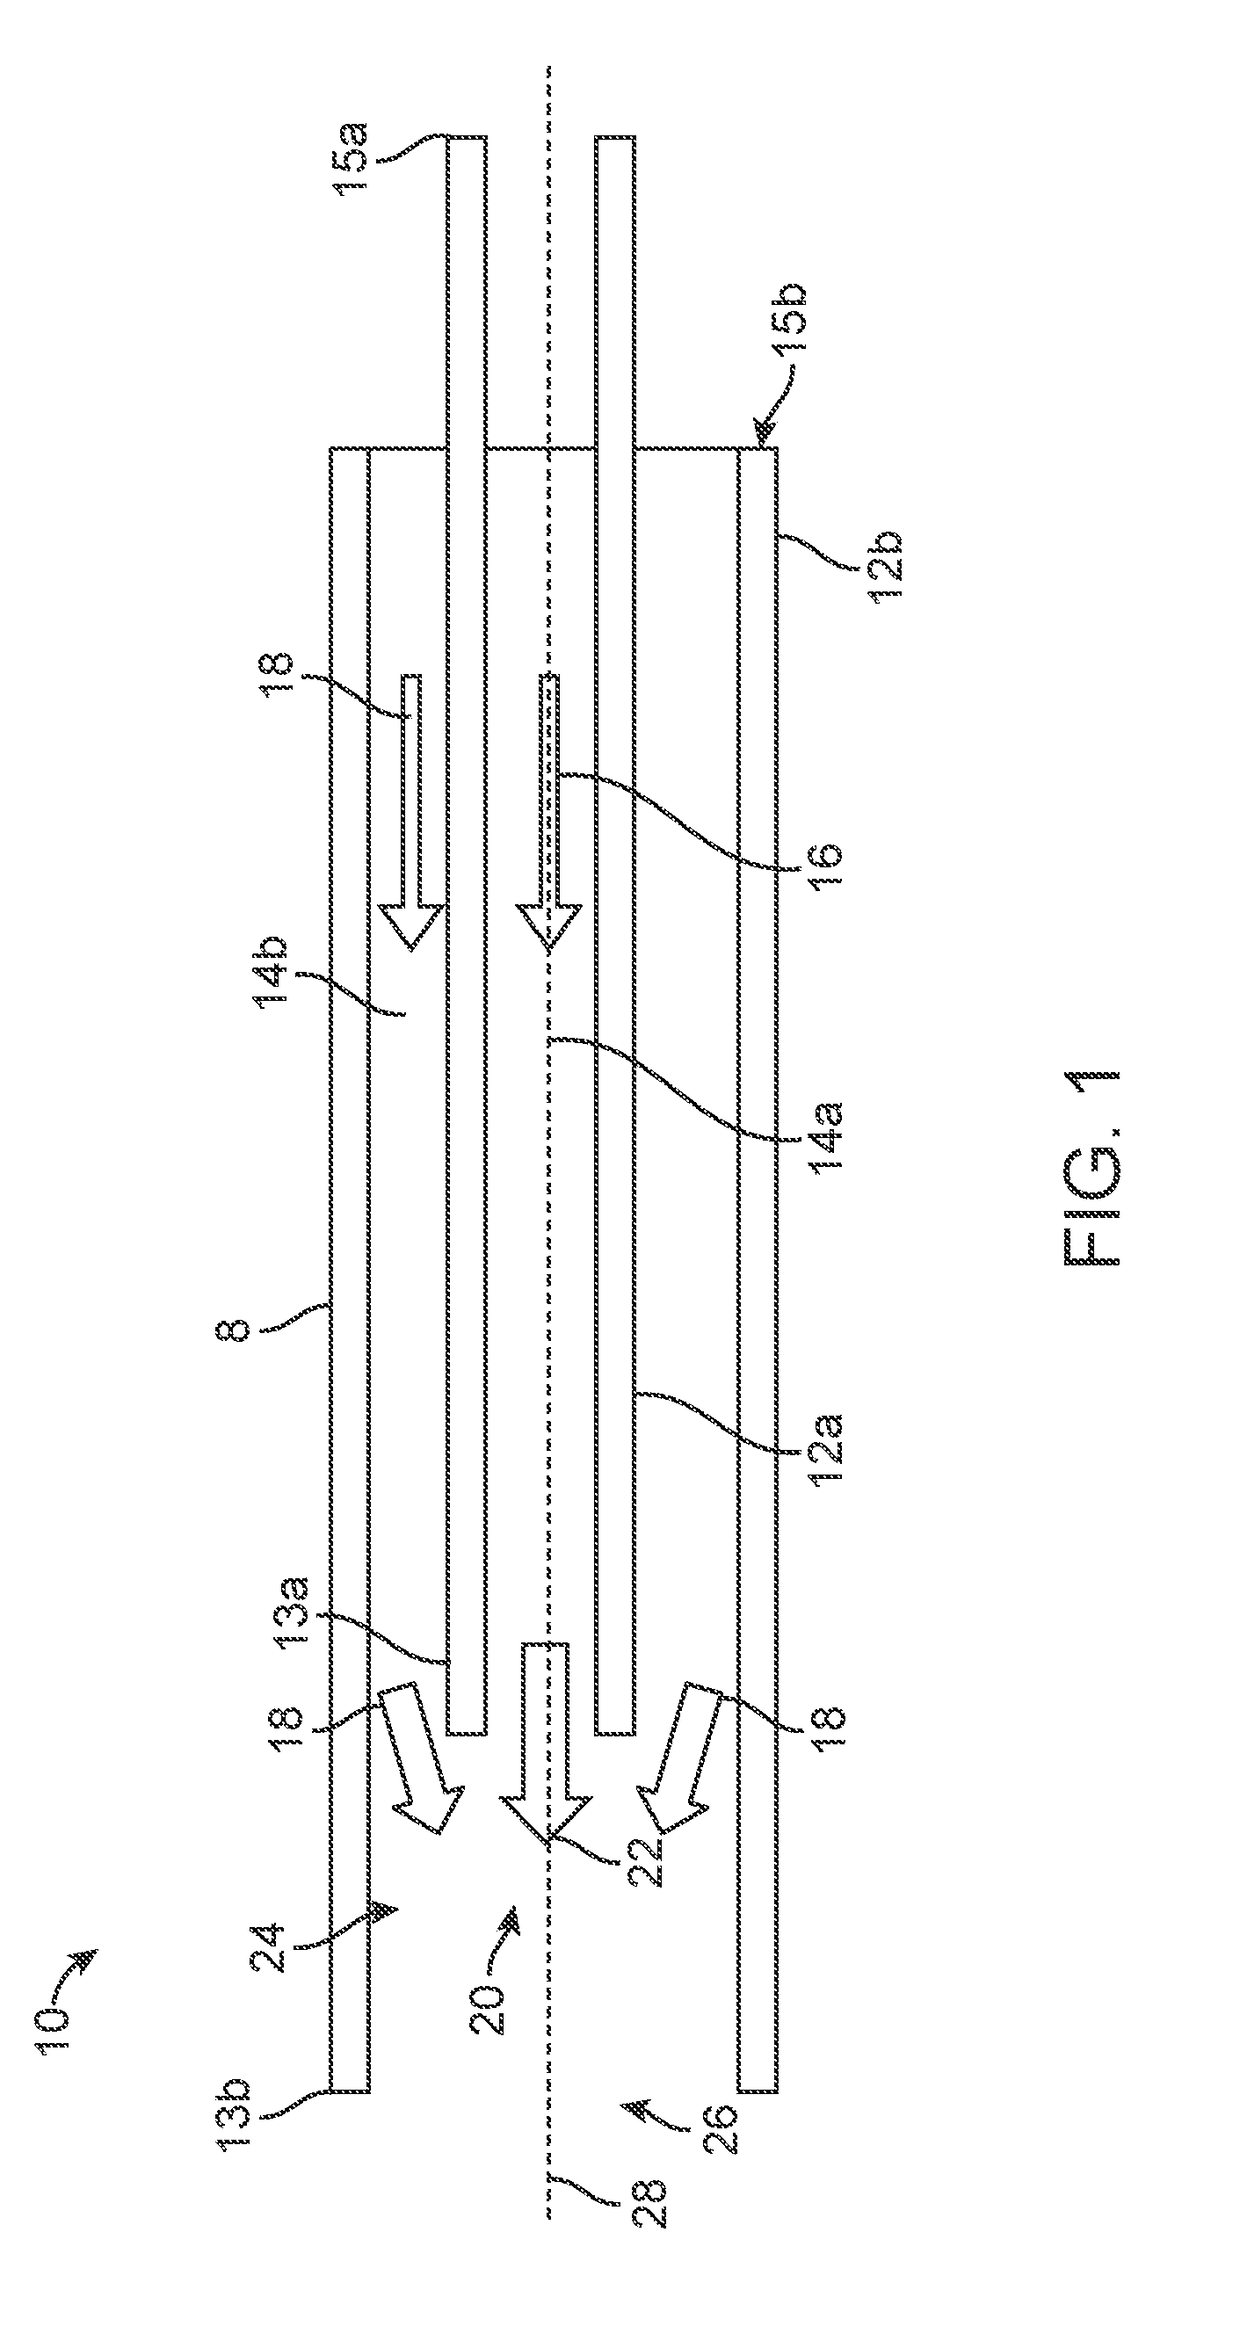 Method and apparatus of echogenic catheter systems